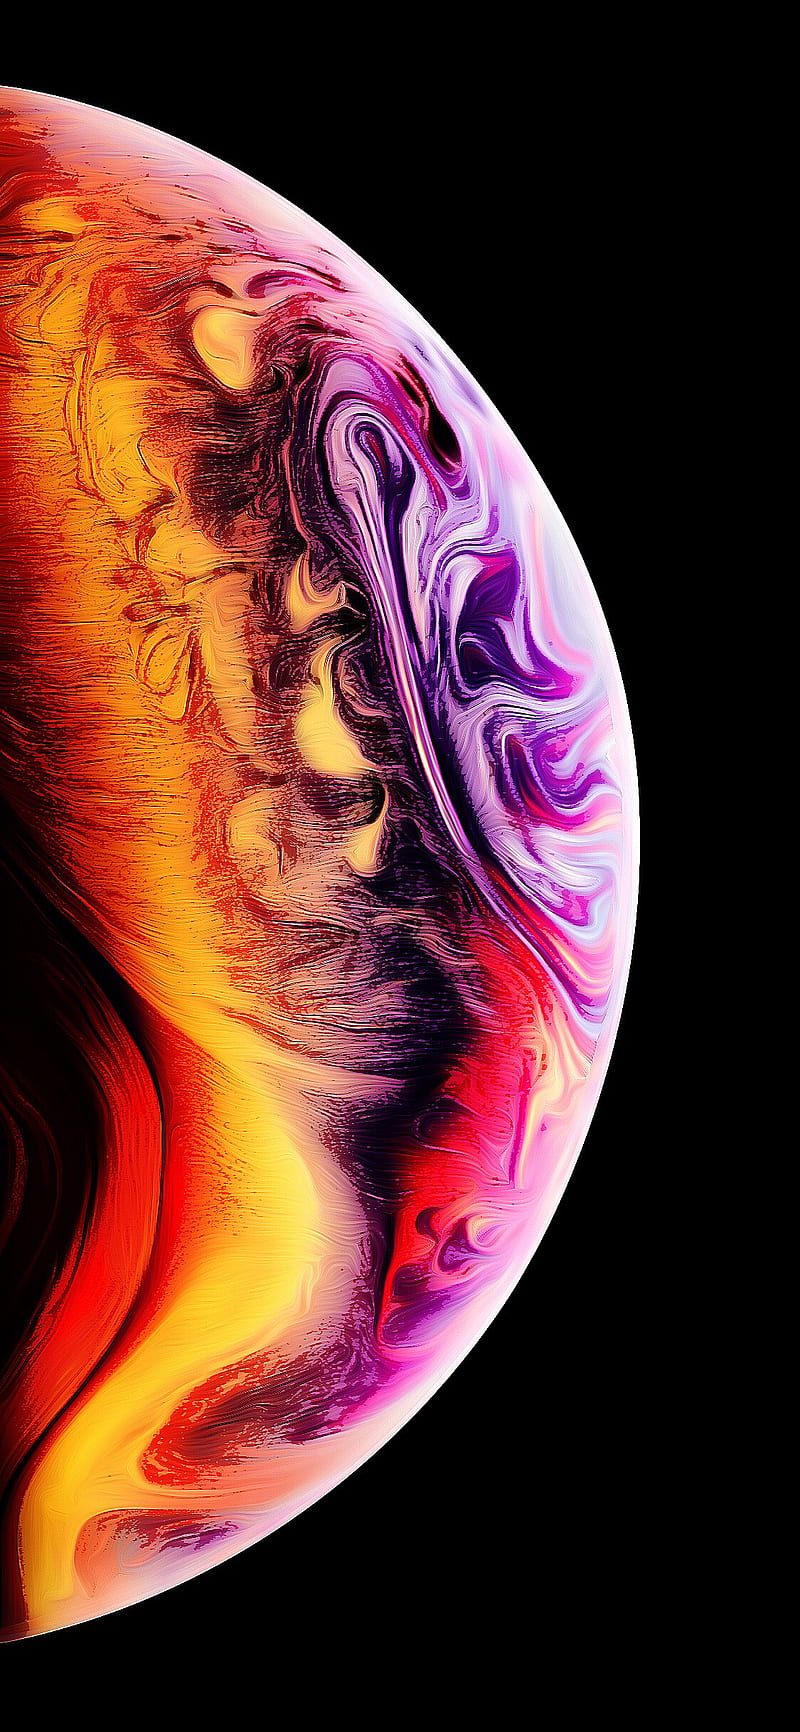 Download Apples new iPhone 13 wallpapers right here 9to5Mac   TECHTELEGRAPH